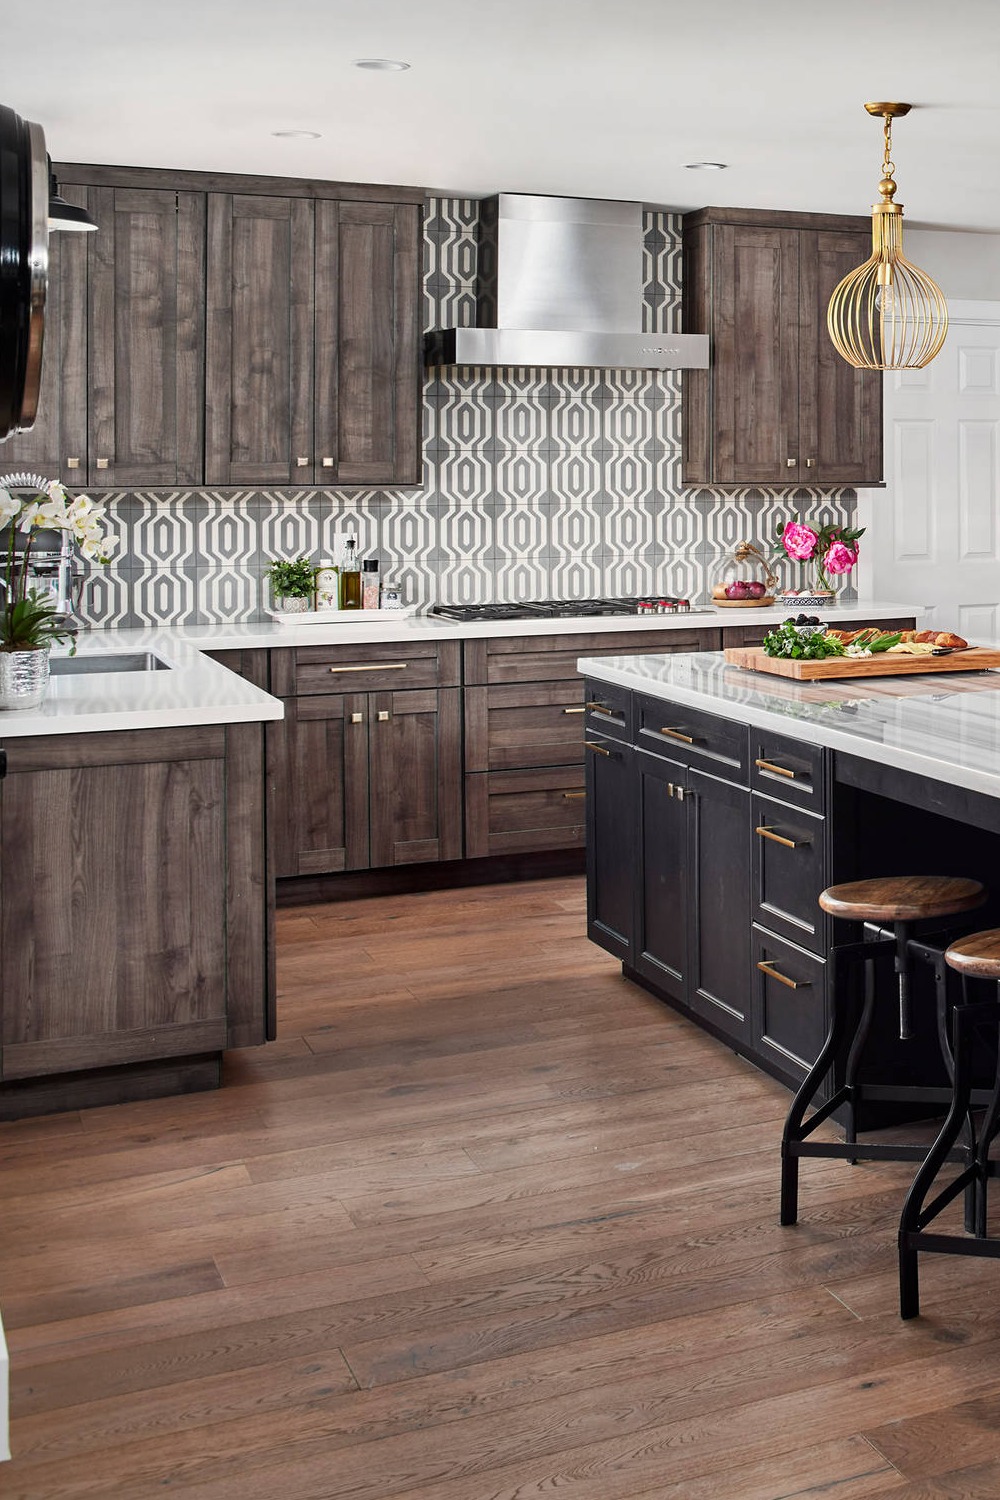 Dark Color Cabinets White Shiplap Walls Contrasting Colors One Of A Kind White Kitchen Countertop